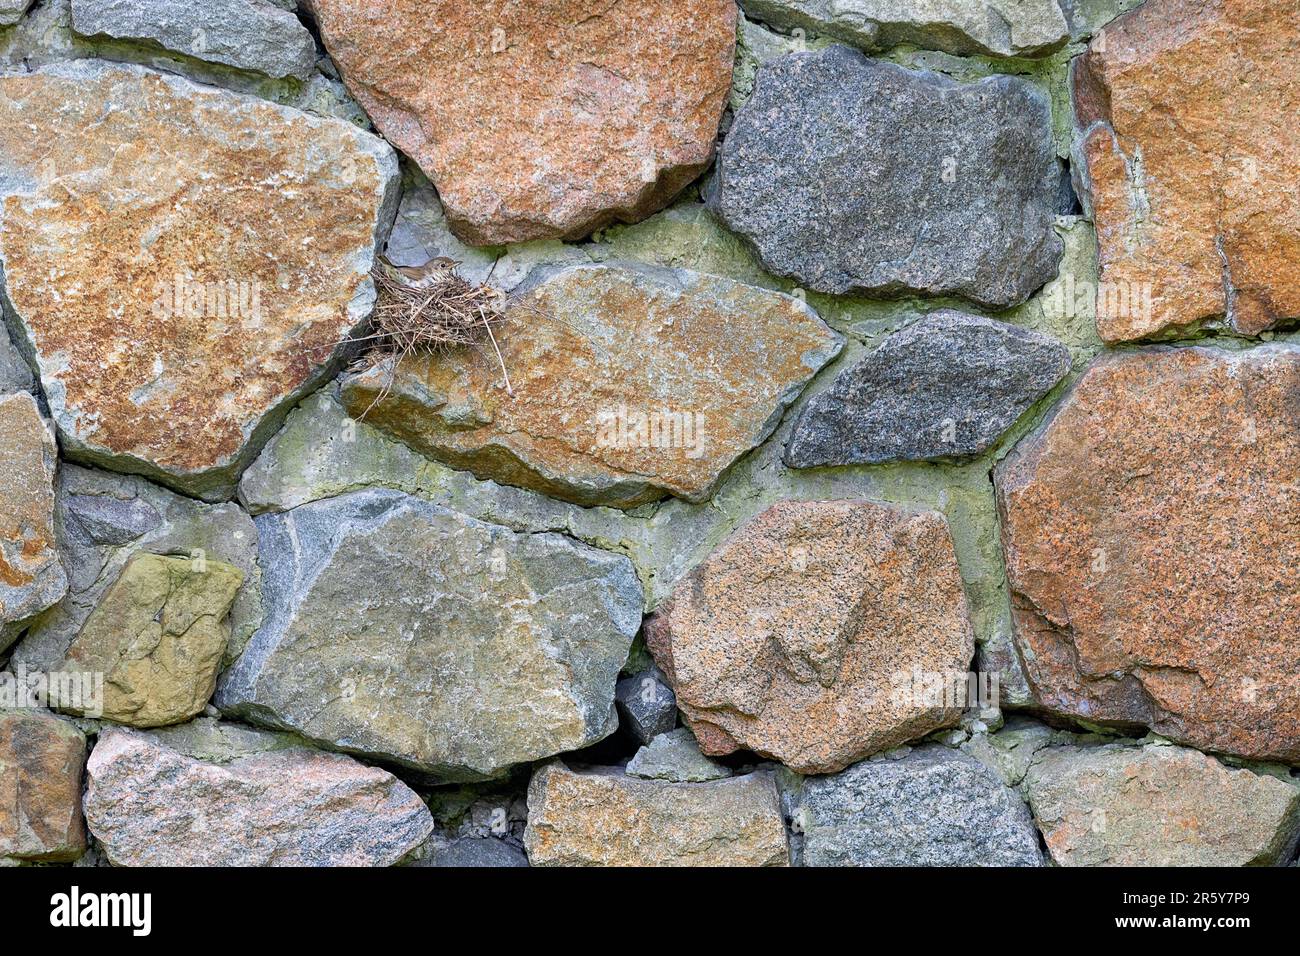 A small bird sits on a twisted nest between the stones of a stone wall paved with large cobblestones. Copy space. Stock Photo